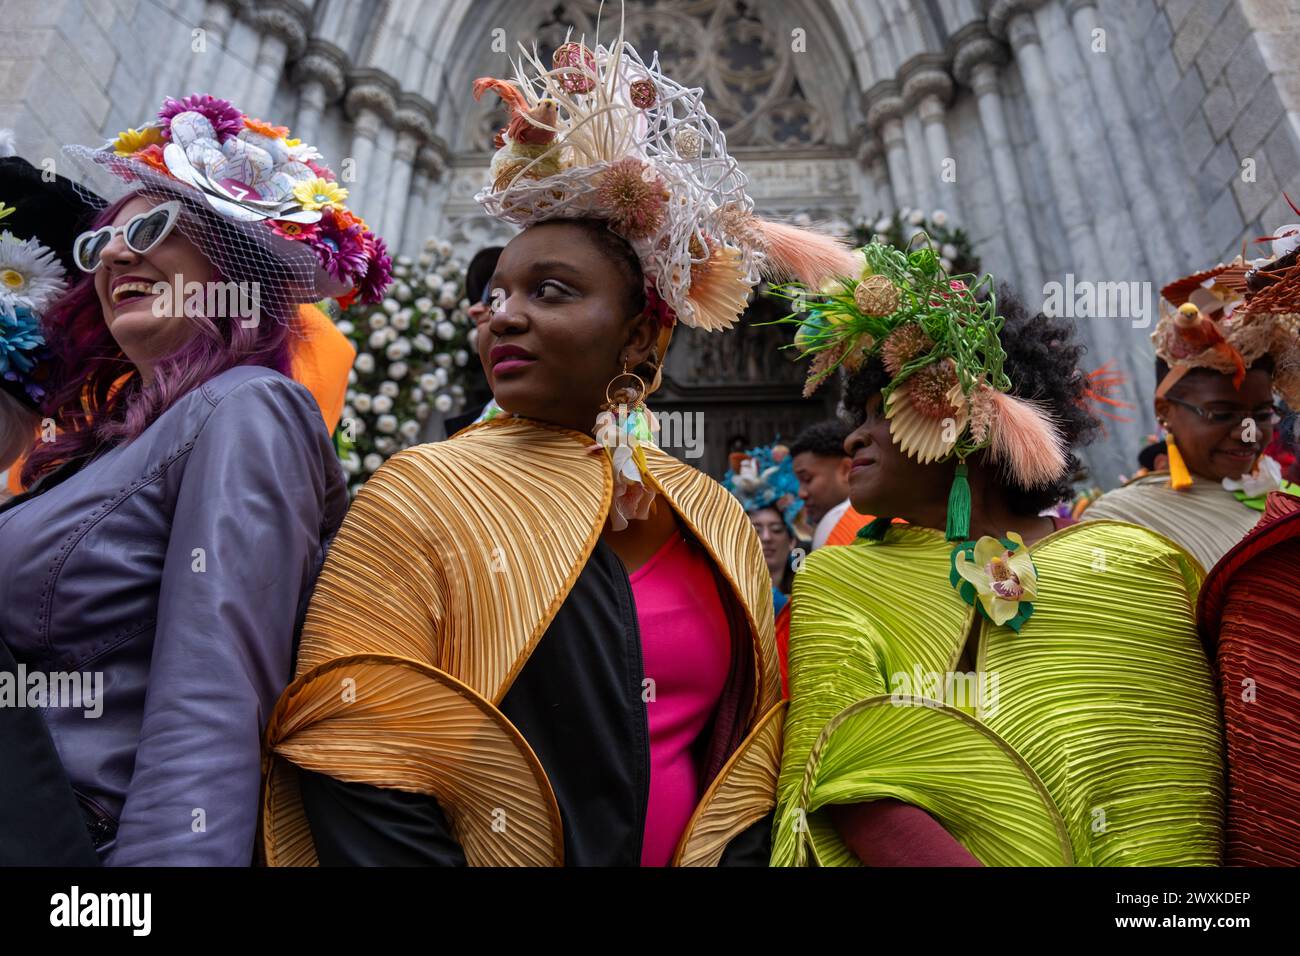 New York City, United States. 31st Mar, 2024. A group of women are dressed up for Easter on the steps of St. Patrick's Cathedral. New York's Easter Parade and Bonnet Festival dates back to the 1870s. An Anual event, New Yorkers don colorful and creative Easter outfits to show off in front of St Patrick's Cathedral on Fifth Avenue. (Photo by Syndi PIilar/SOPA Images/Sipa USA) Credit: Sipa USA/Alamy Live News Stock Photo